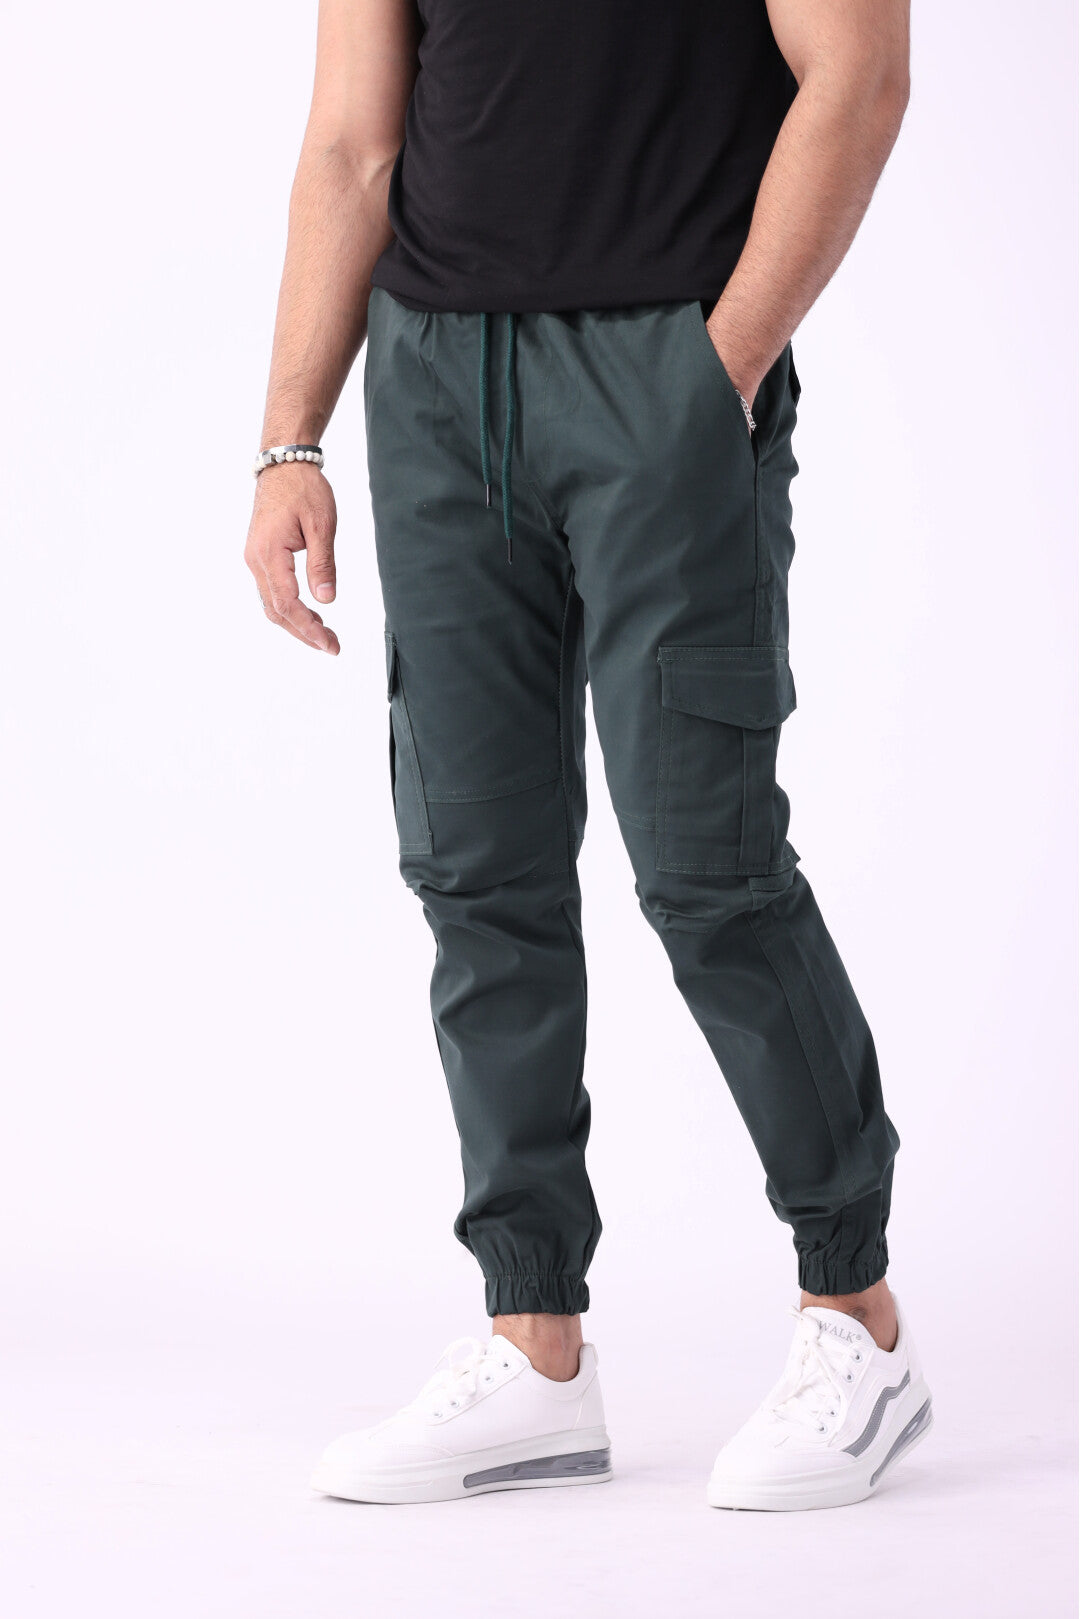 Cargo Six Pocket Trousers for Men - Green 6 Pocket Cargo Pant